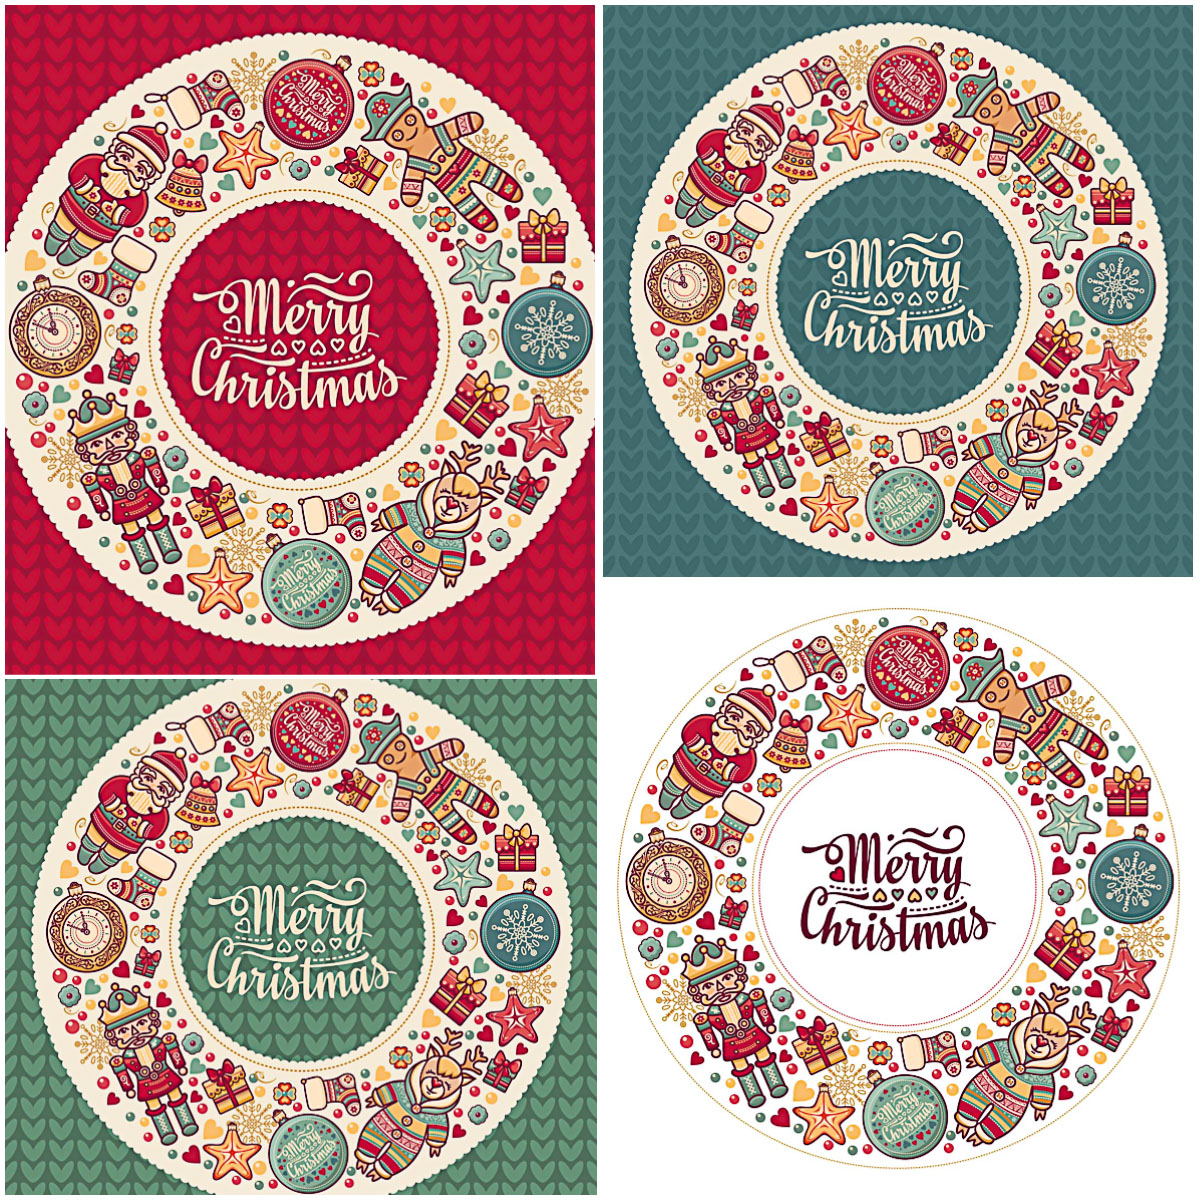 Jolly cards with Christmas rings